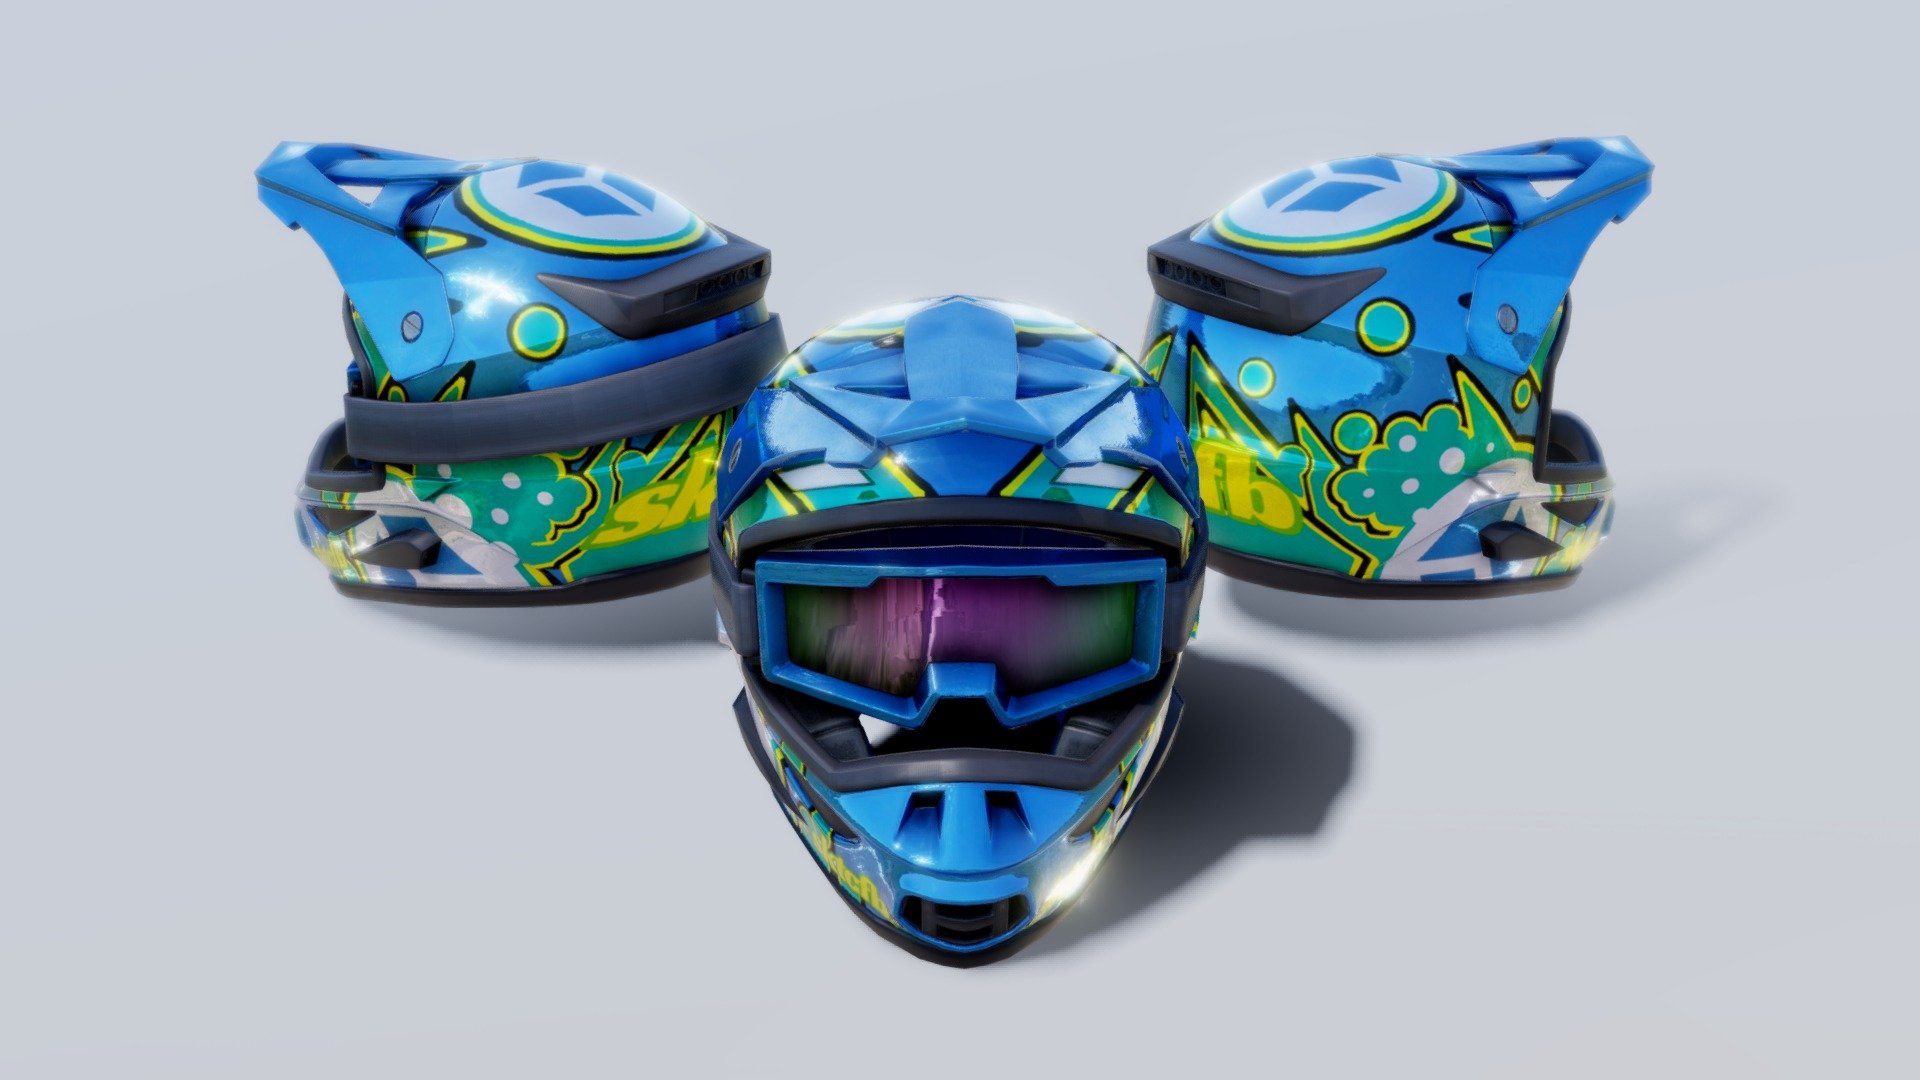 hey, i made some motocross helmet. kind a nice for your scene or mockup your design. 2048px texture and middlepoly. also i have free stuff for download please cek my page, and follow for update upload.

asset containt 3 type helmet models + 2048px  texture + 1 Blankcolor no decals 2048px texture.

looking for freelance 3D artist for your mobile game? Feel free to ask me by email feral.fe2@gmail.com

Also you can check my instagram account @ferozes

Thank you soo much for your support guys&hellip; love you all!!!
Have nice scene 3d model